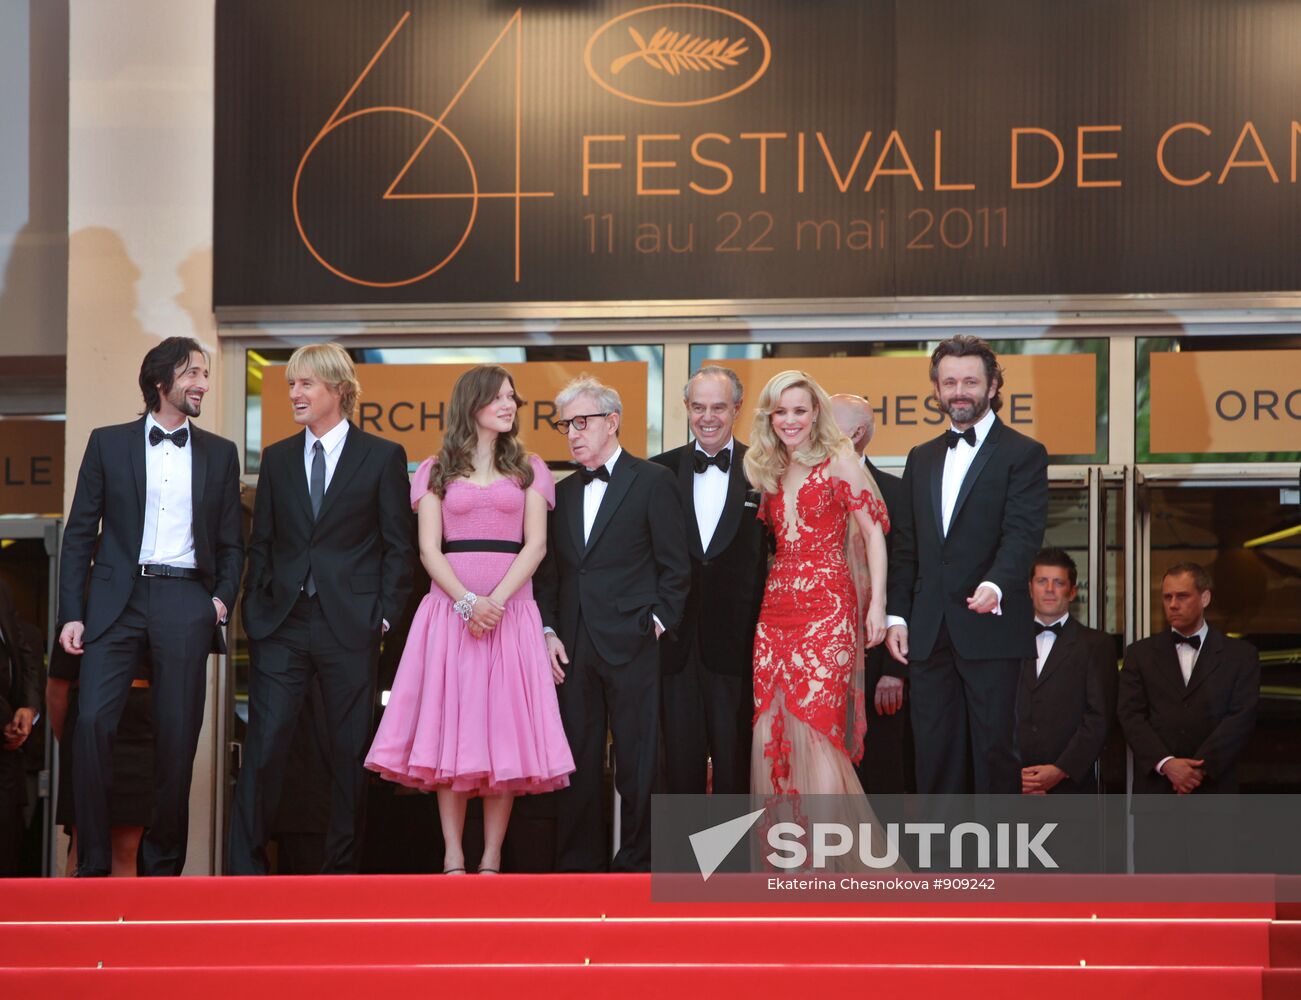 Opening ceremony of 64th Cannes Film Festival May 11, 2011